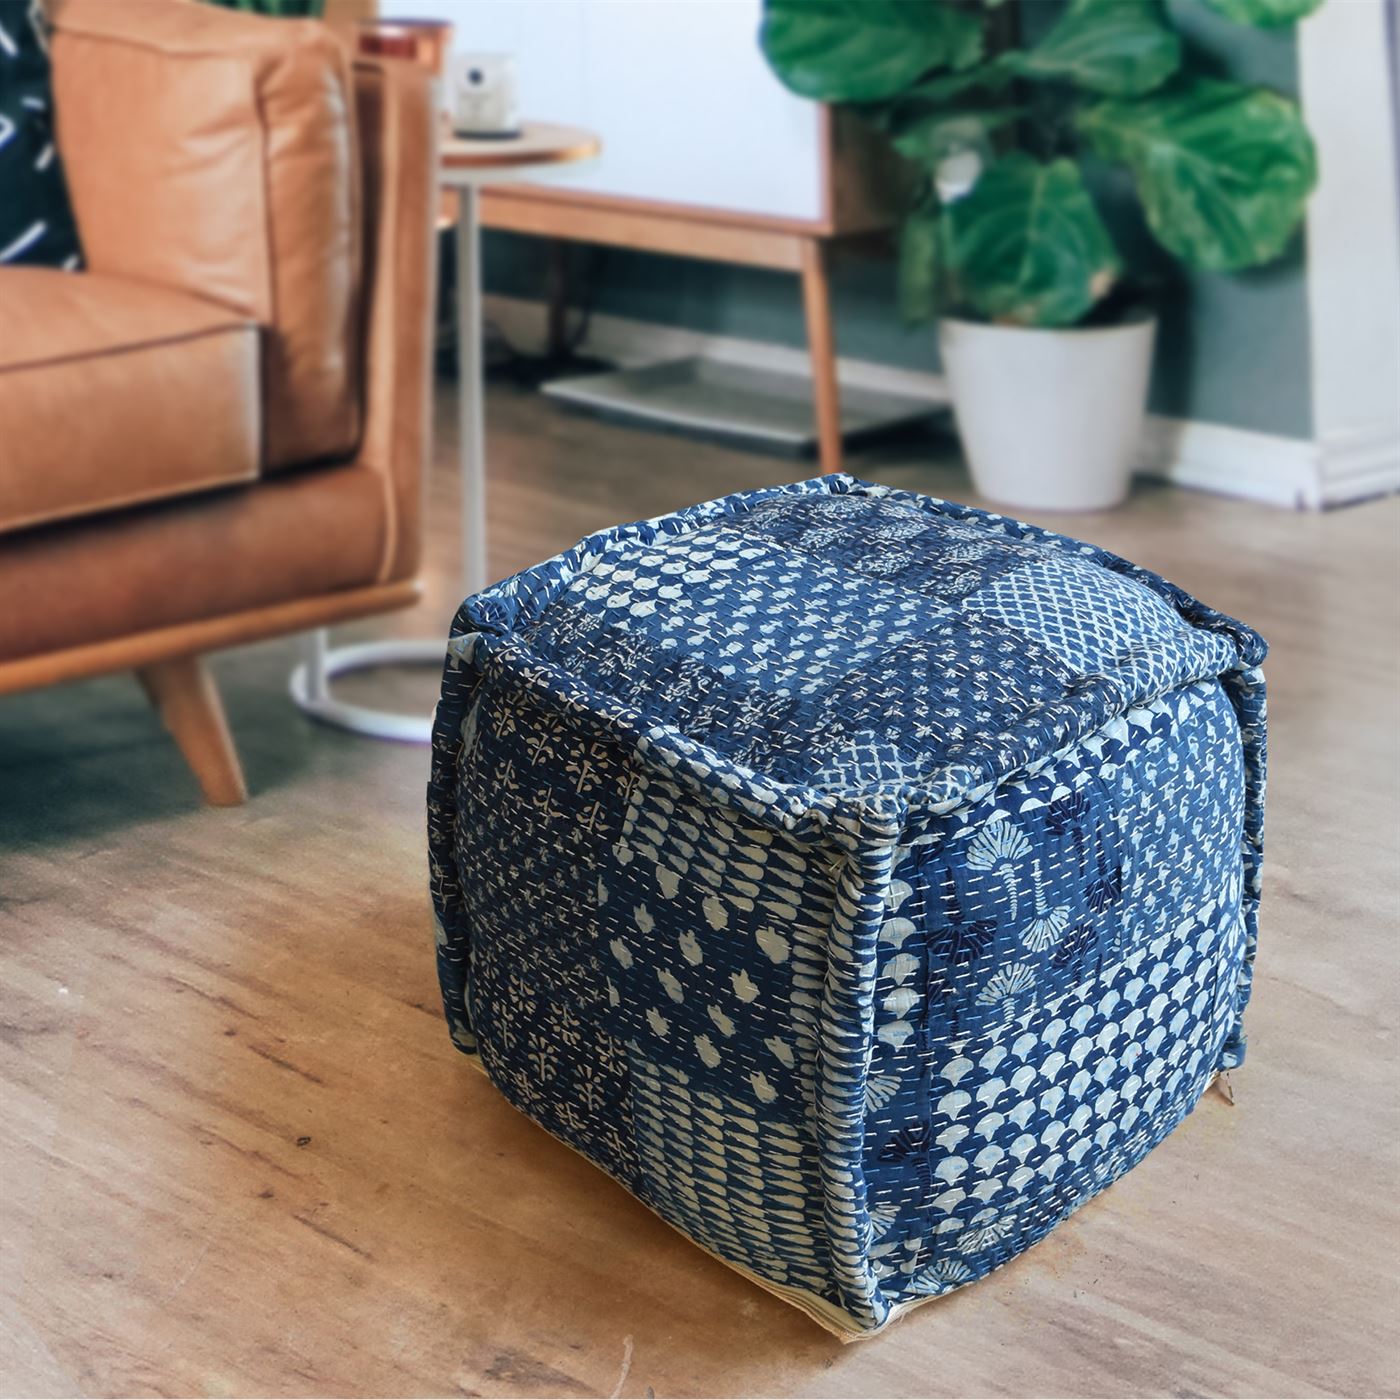 Donora Pouf, Cotton, Printed, Blue, Pitloom, Flat Weave